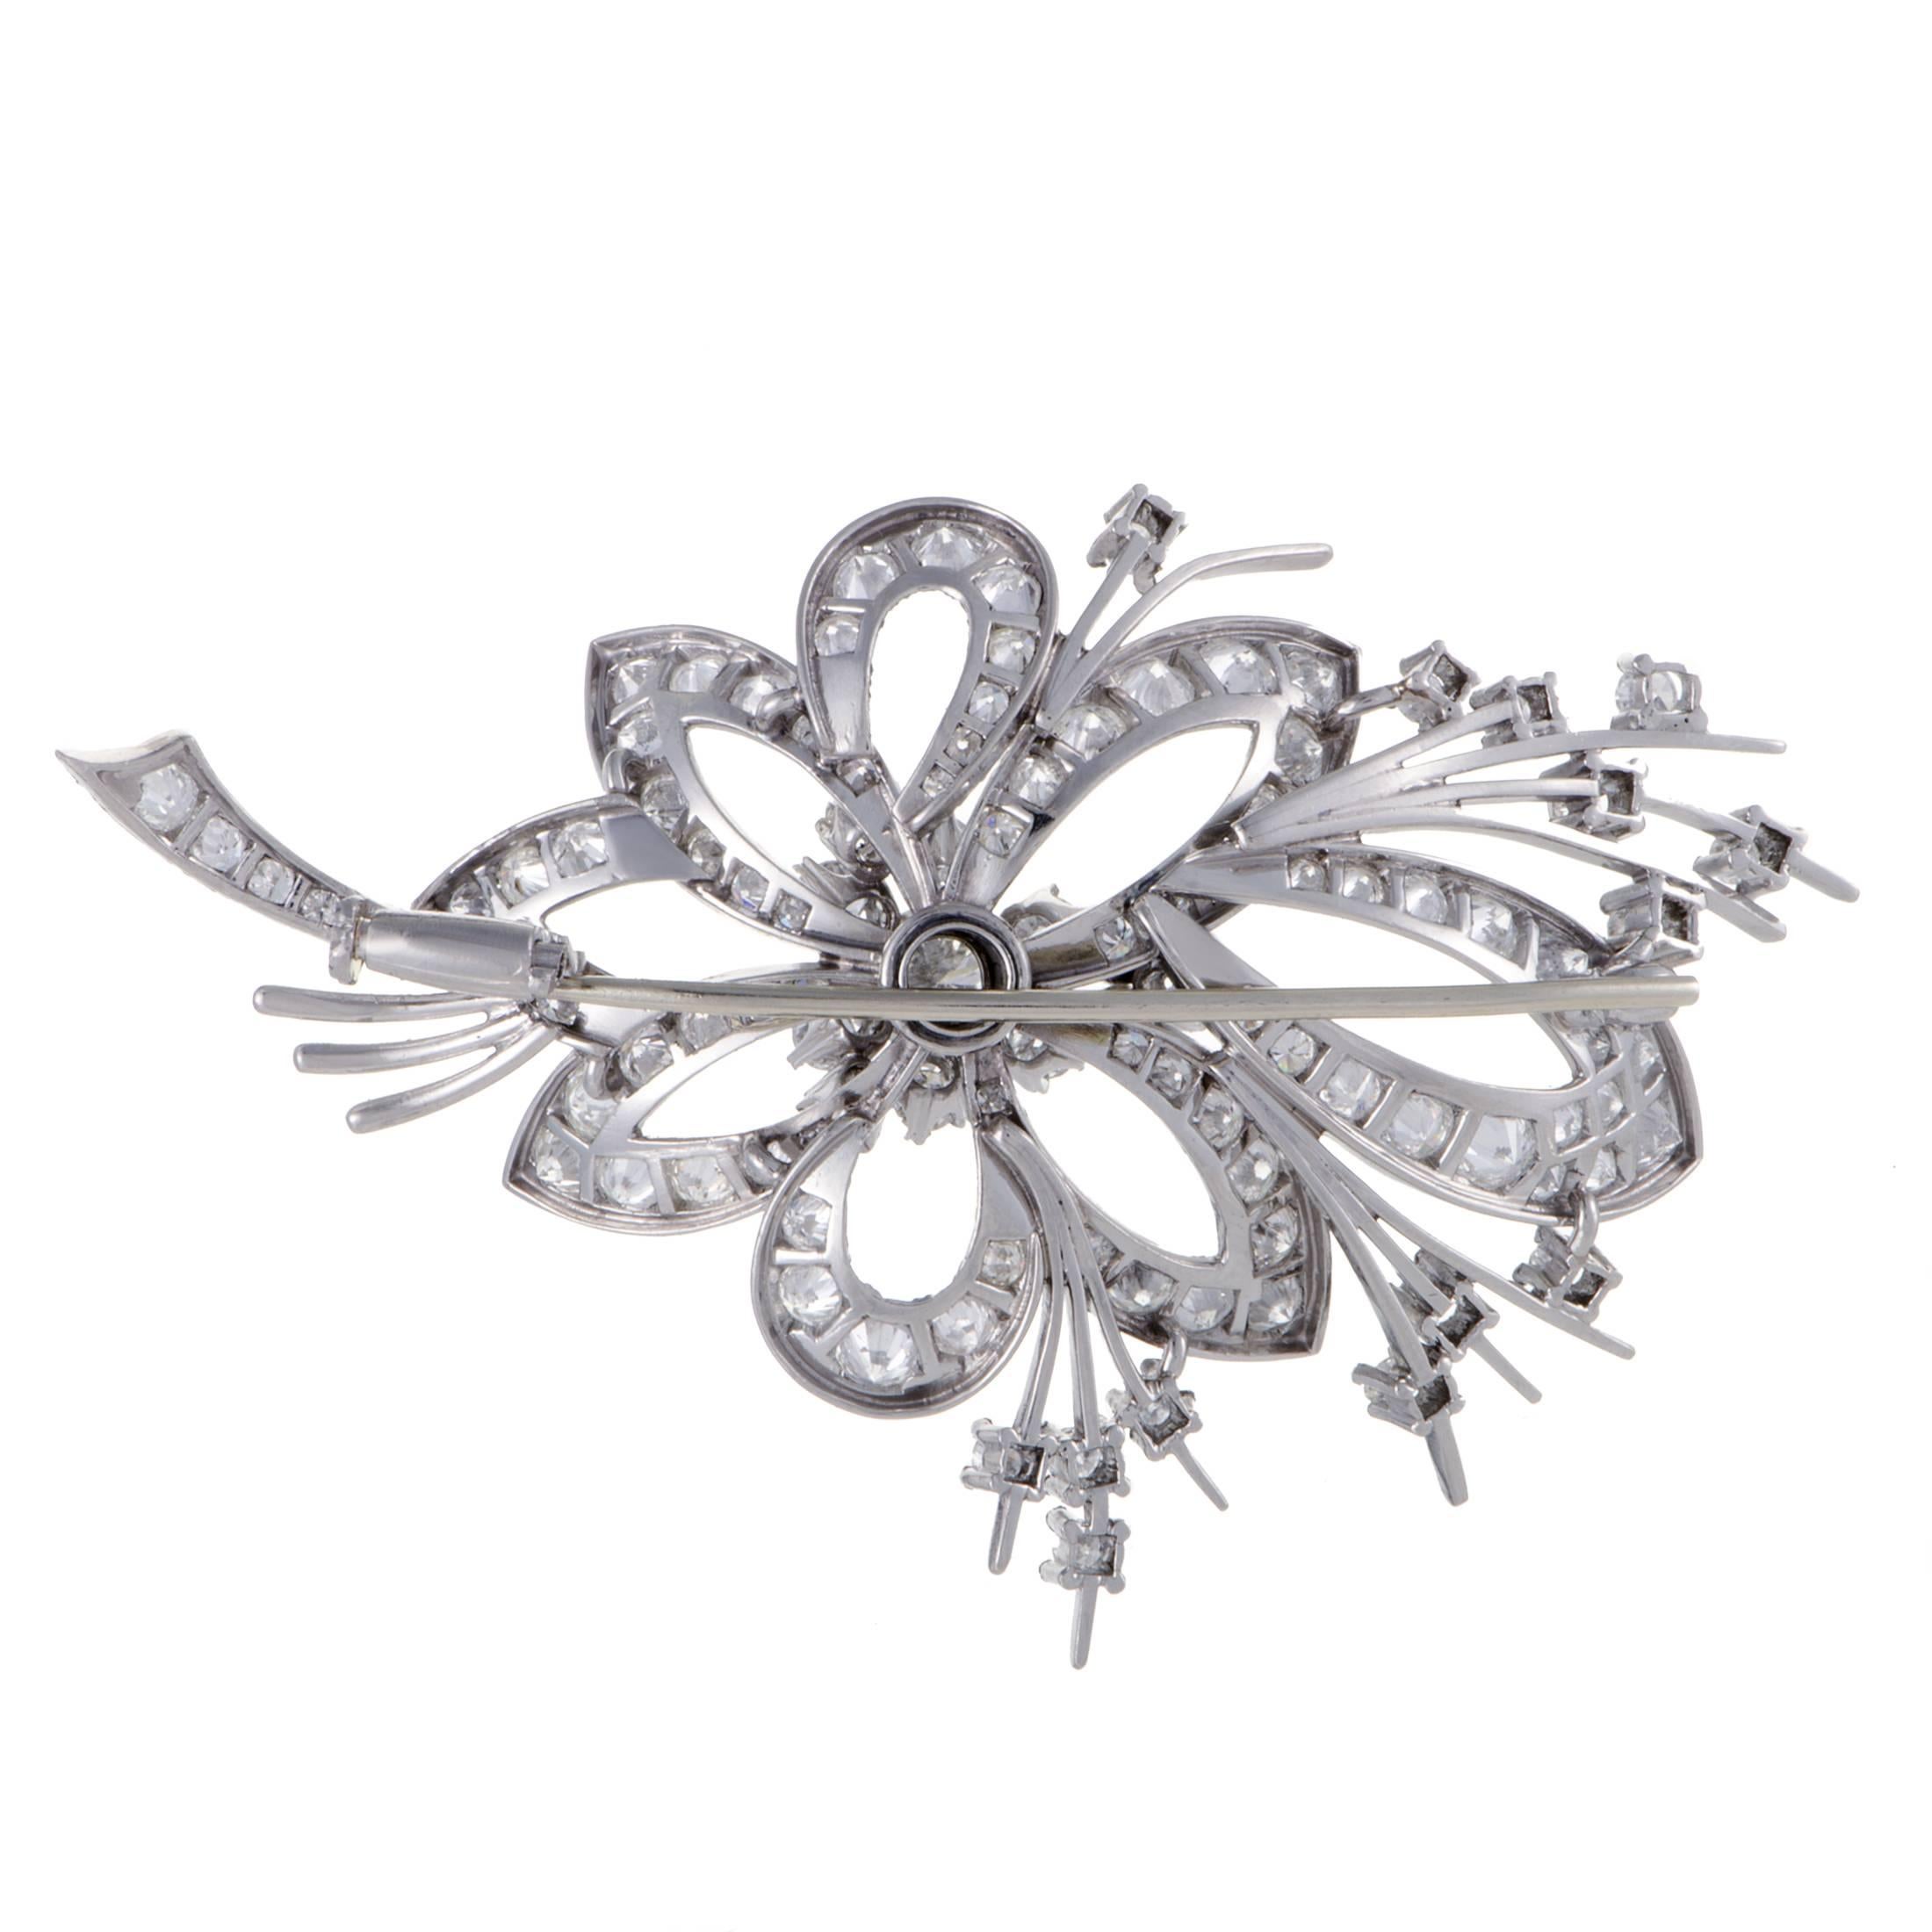 The delightful motif of a flower is presented in majestic fashion in this astonishing brooch made of gleaming platinum and embellished with scintillating side diamonds amounting to 6.80 carats as well as a stunning central stone weighing 0.70ct.